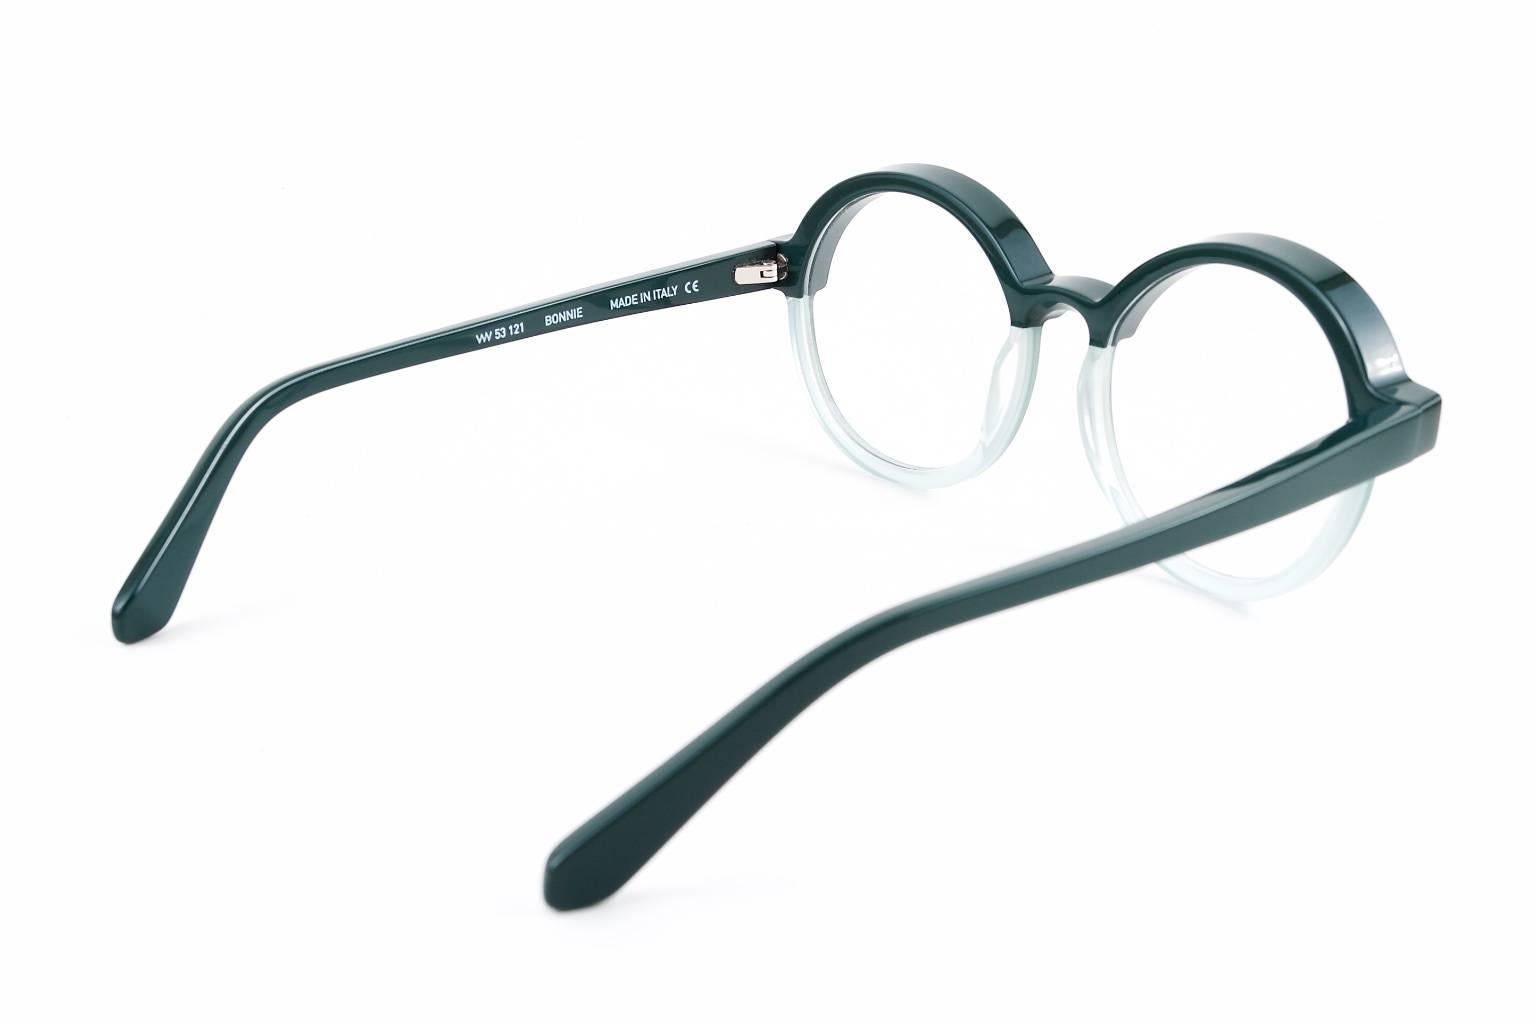 Gray Veronika Wildgruber Bonnie Eyeglasses - Made in Italy For Sale